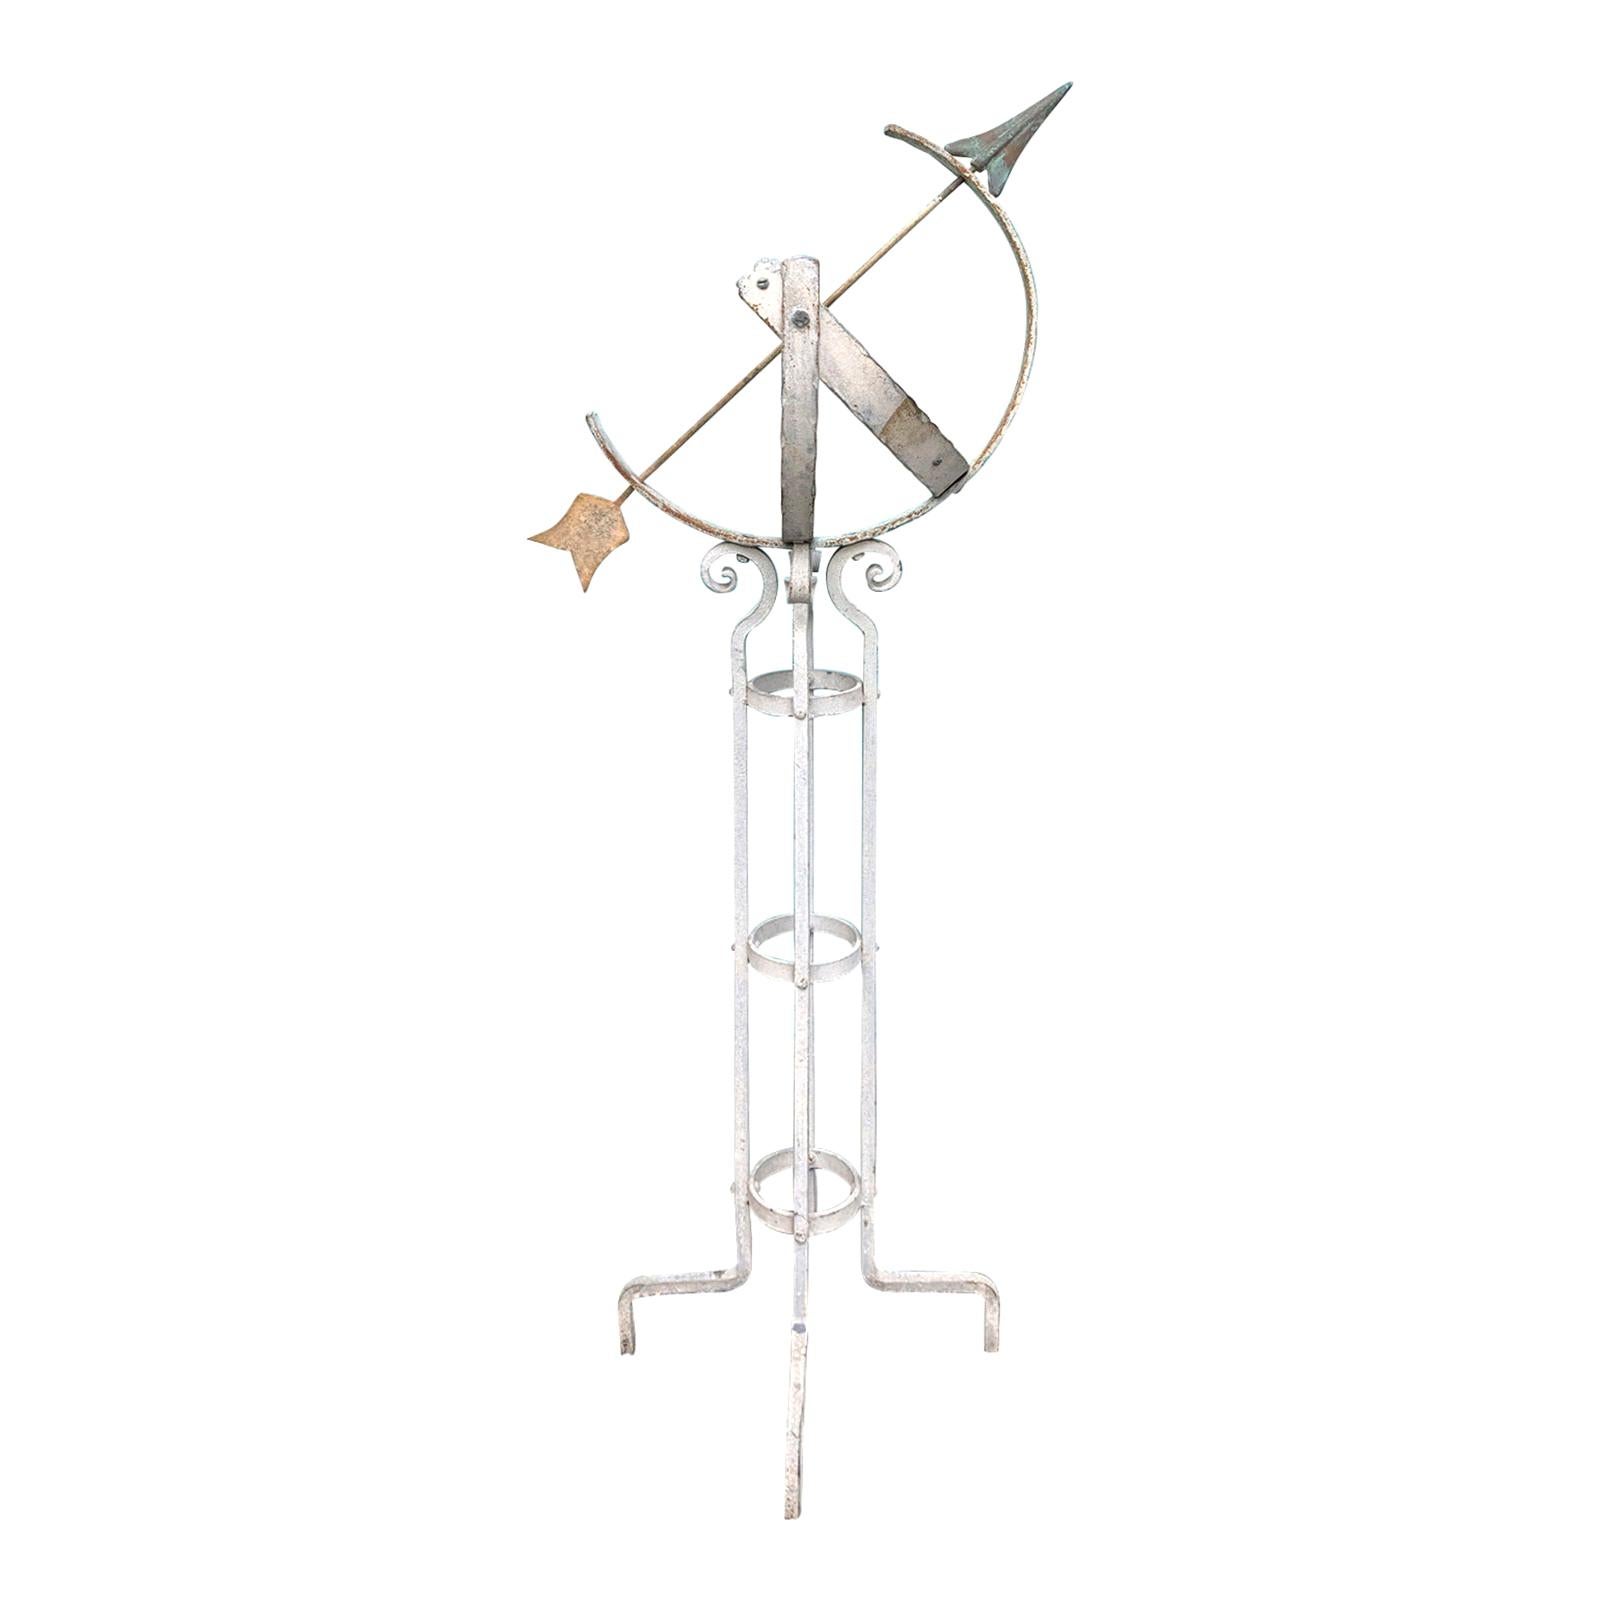 Founders American Armillary, Stamped "Founders 1958", circa 1950s For Sale